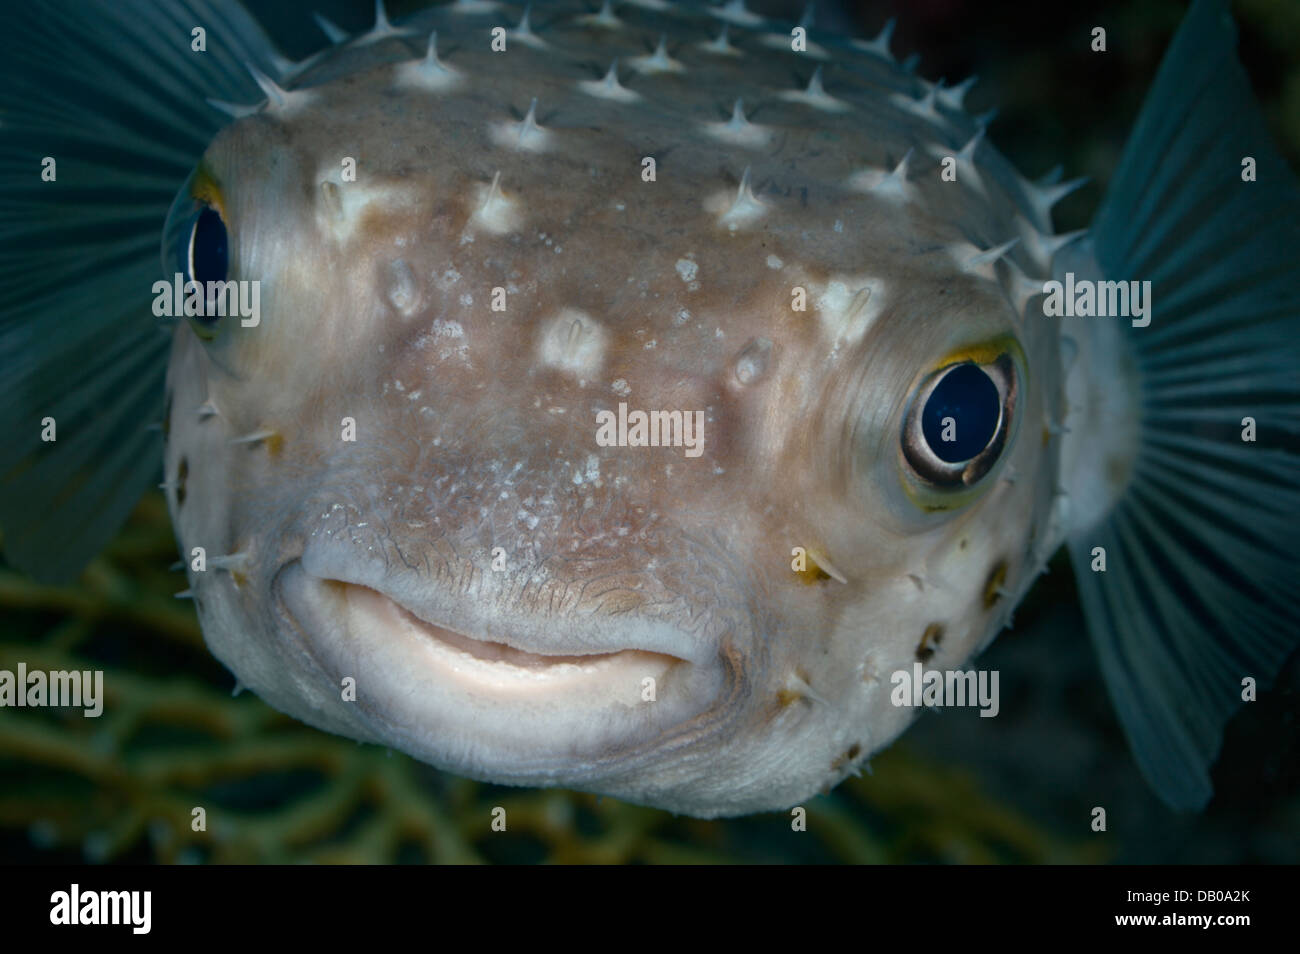 Poisonous puffer fish is posing for a portrait. Stock Photo